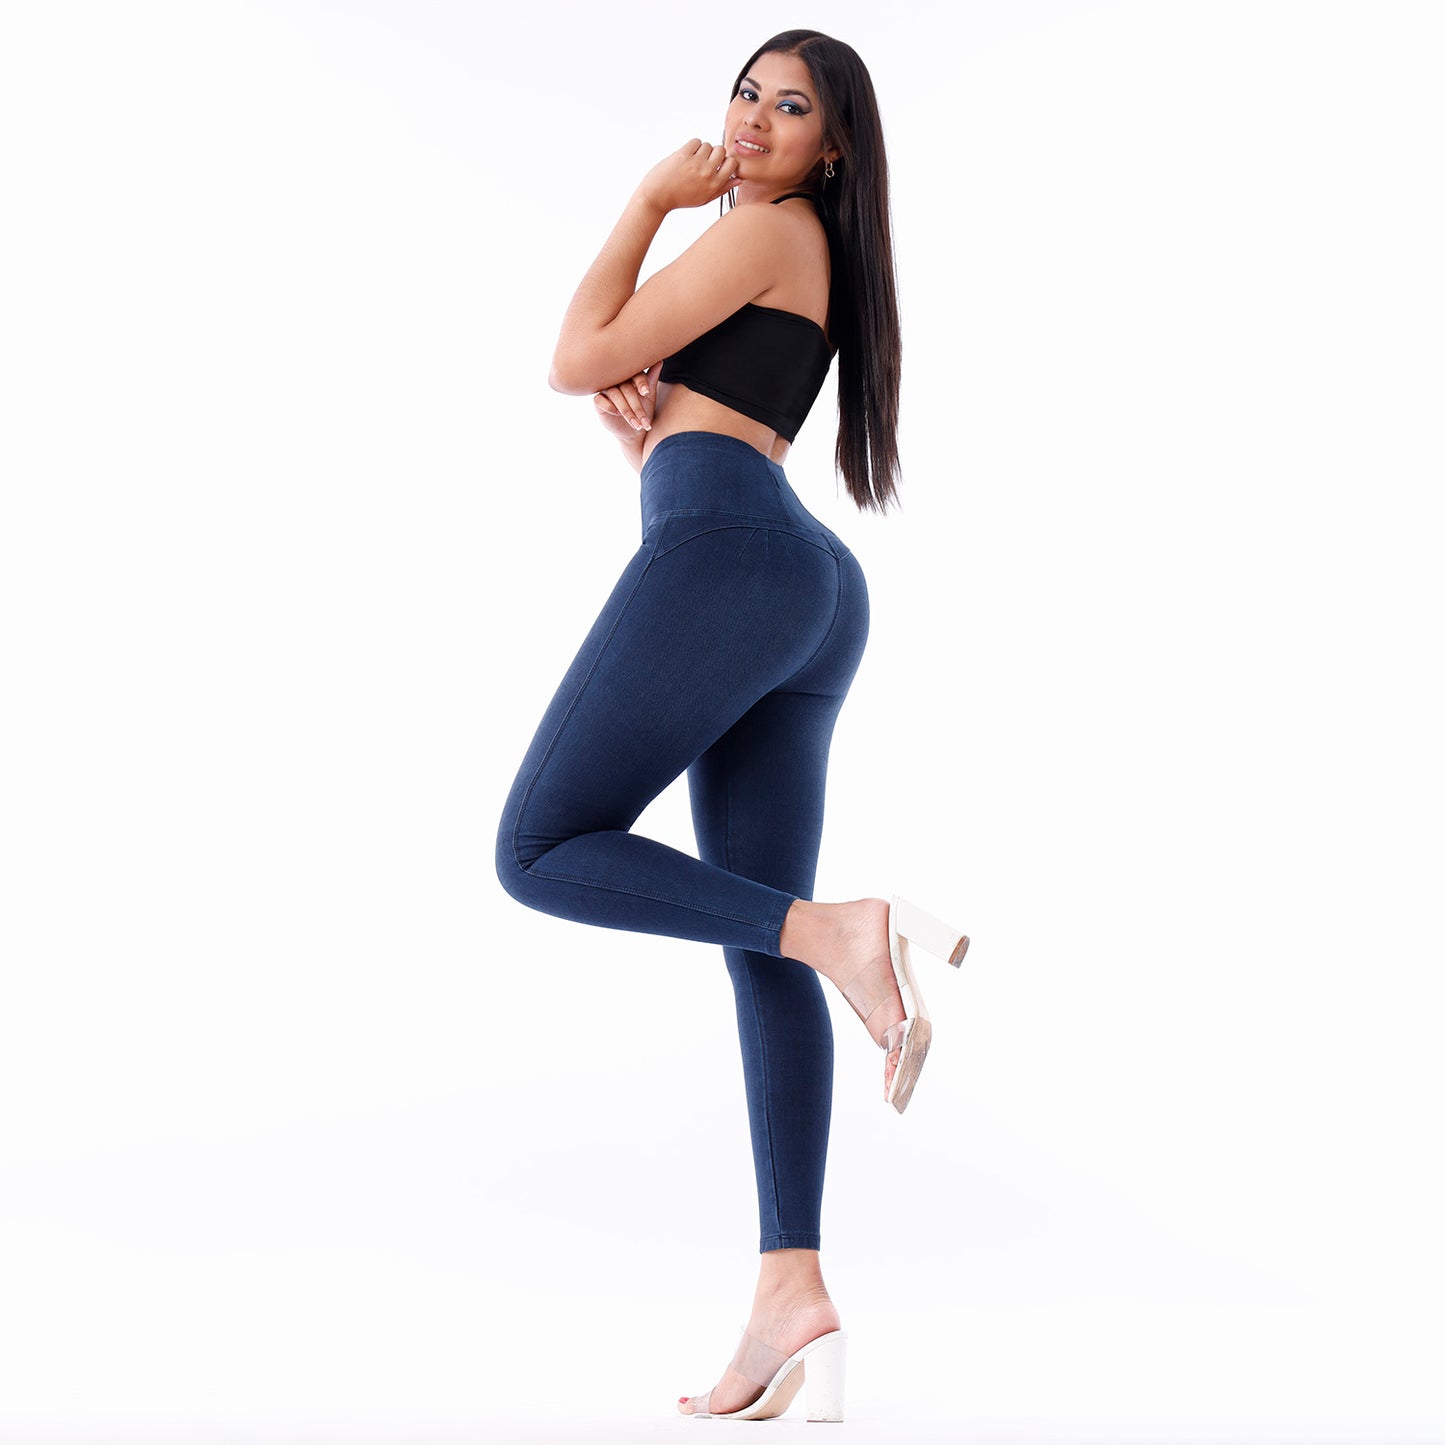 Leggins Push Up Mujer French Terry Cintura Pitillo Steel - 230239